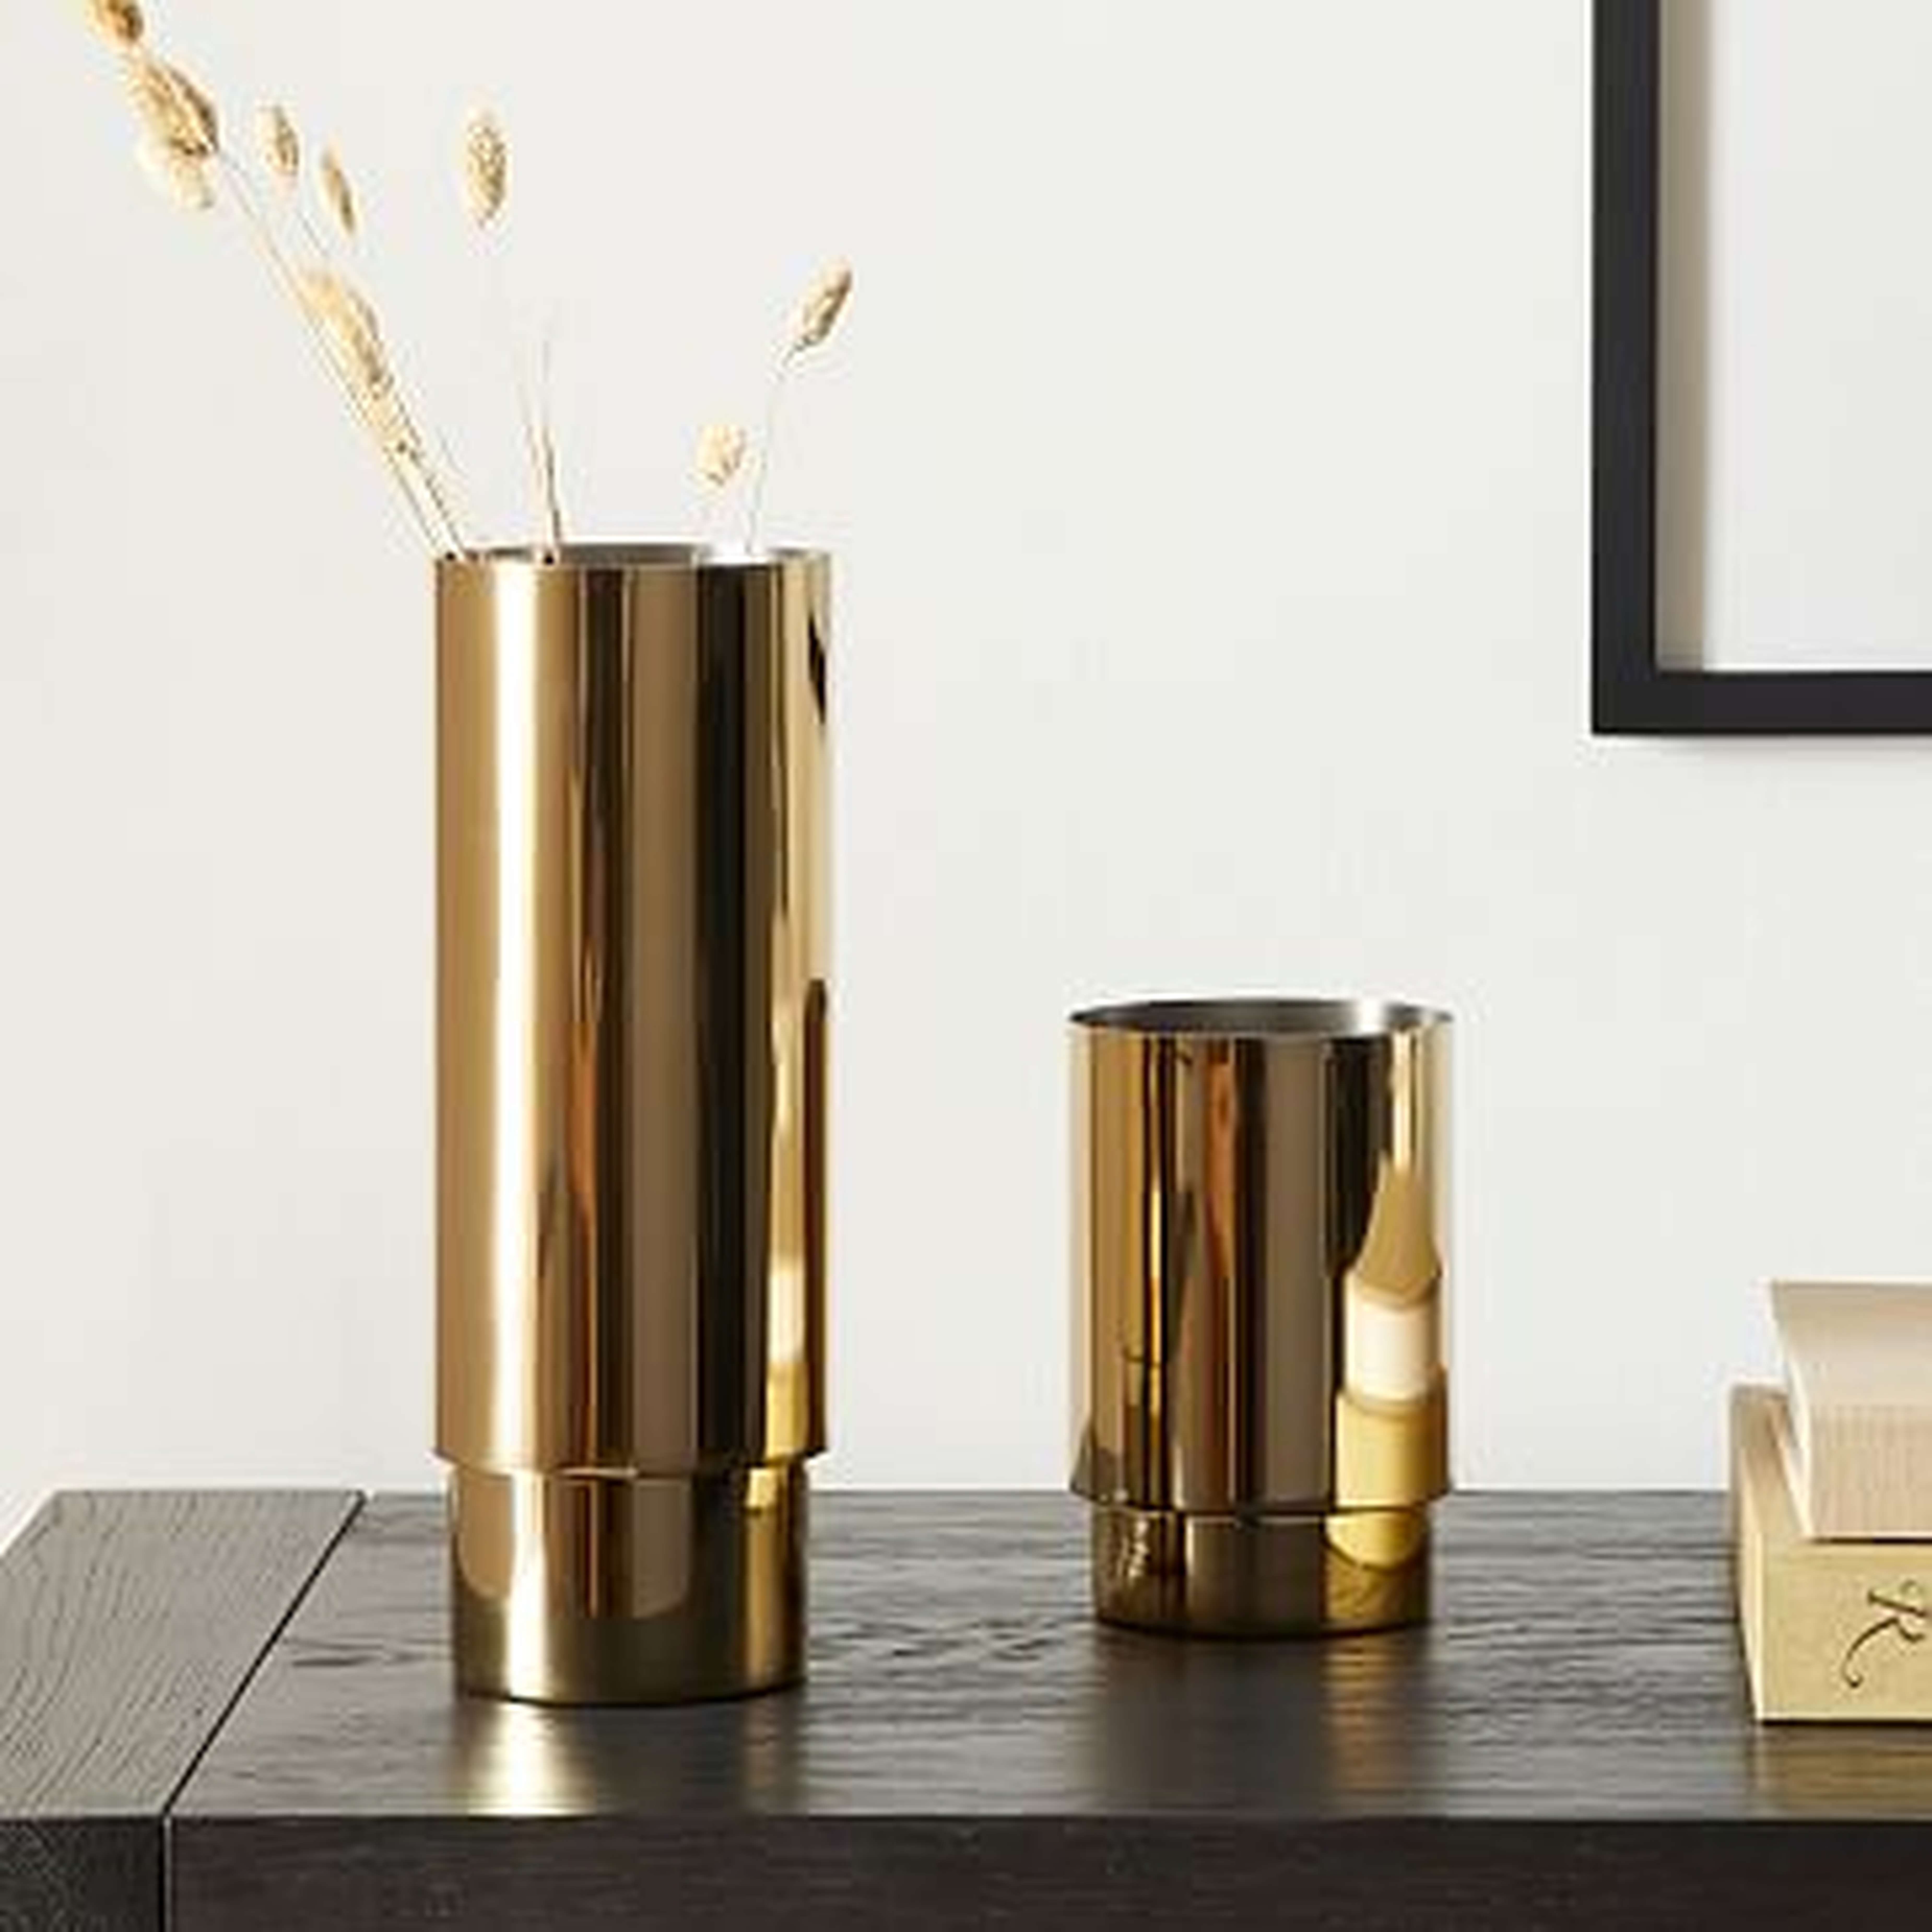 Brass And Enamel Tube Vase, Polished Brass, Small And Large, Set of 2 - West Elm